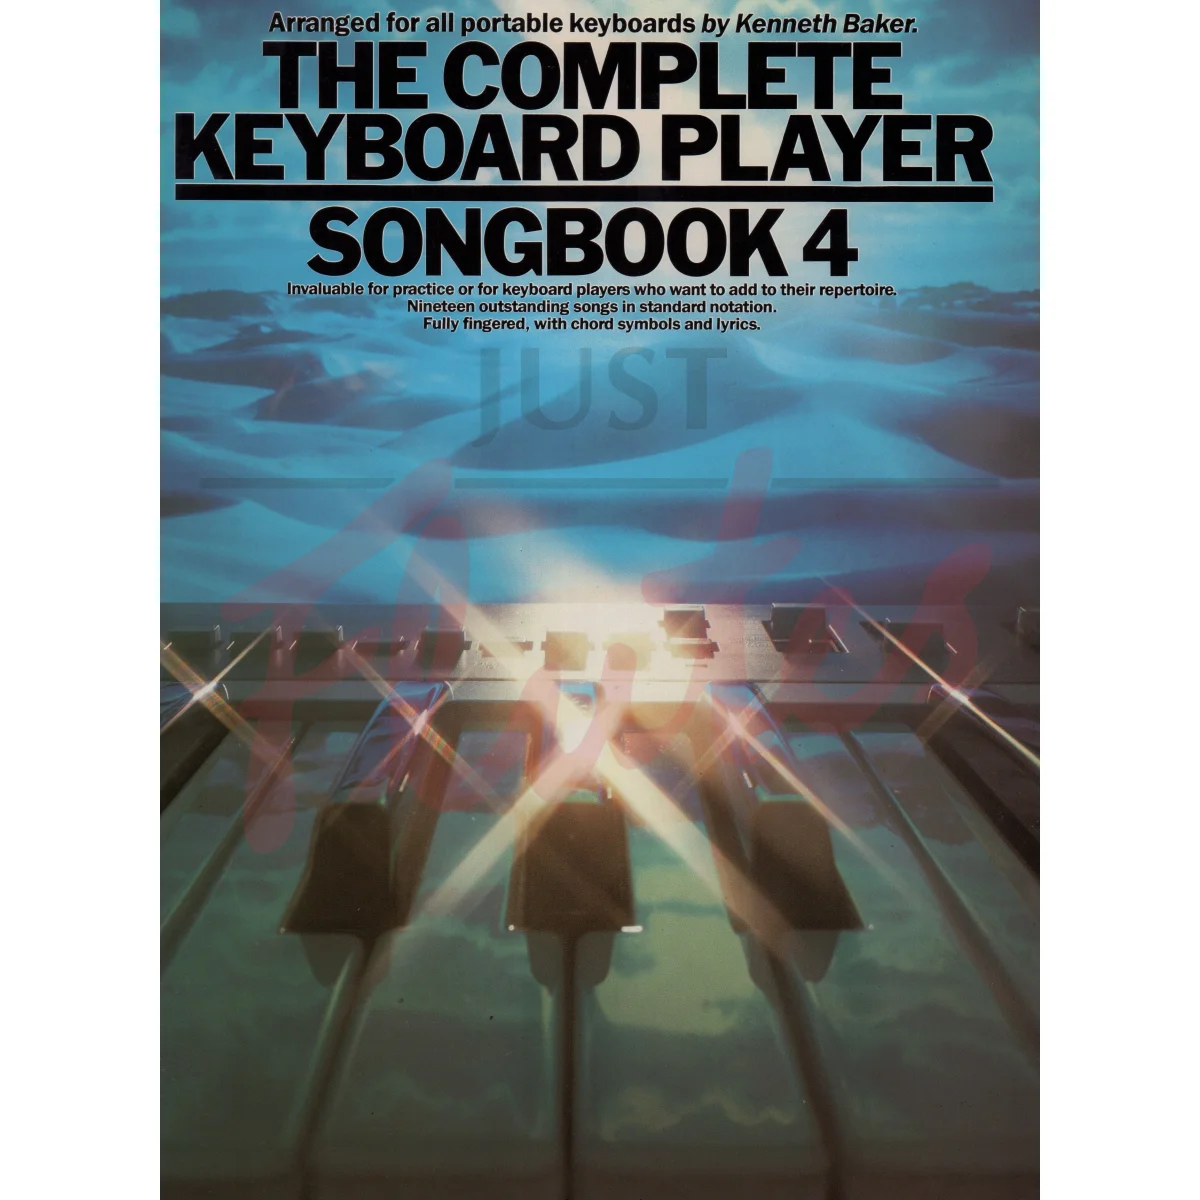 The Complete Keyboard Player Songbook 4